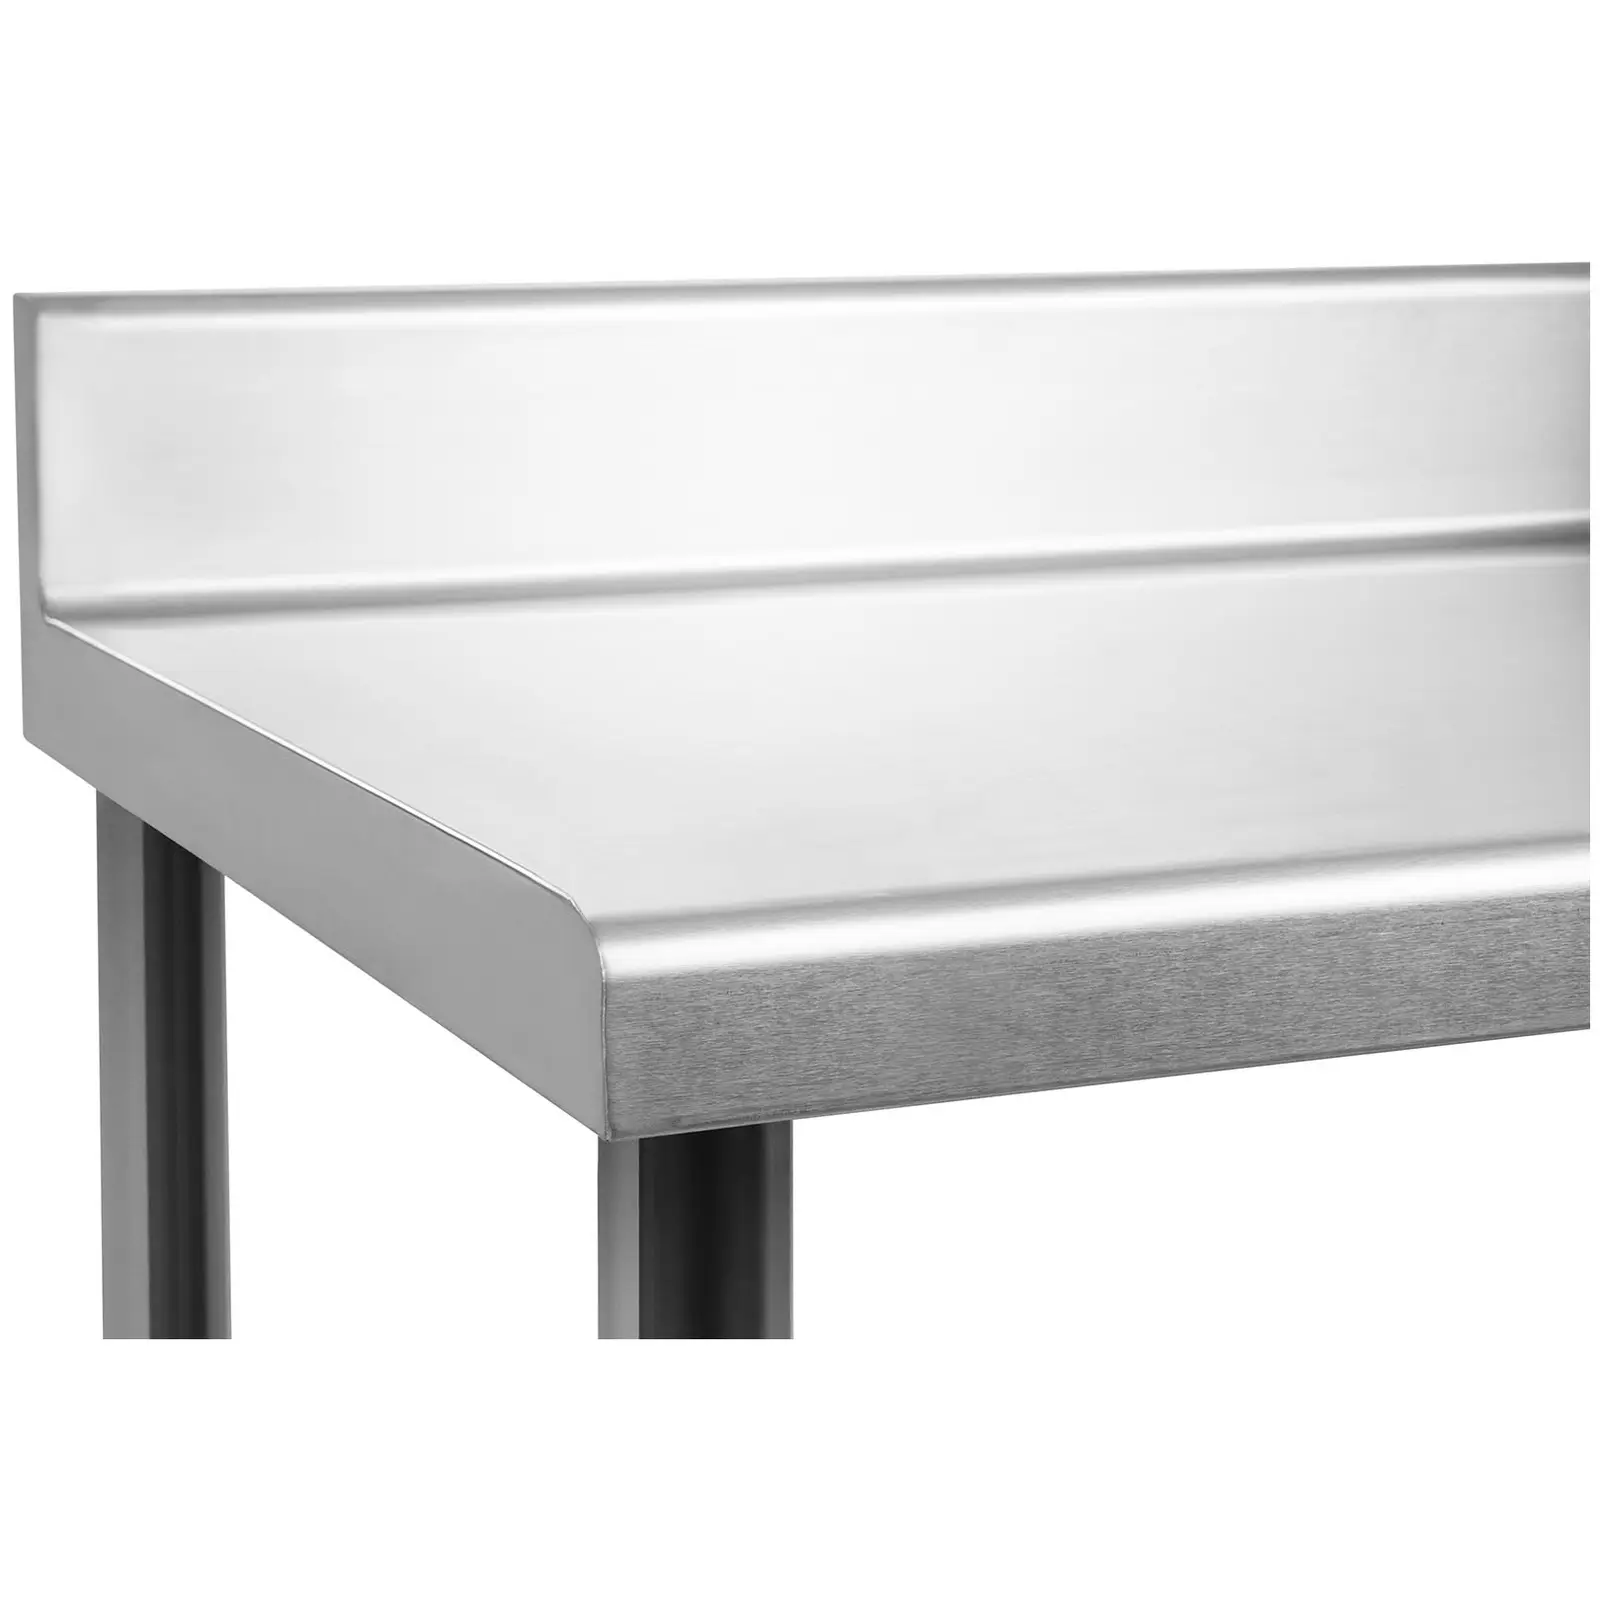 Stainless Steel Work Table - 120 x 60 cm - upstand - 137 kg carrying capacity